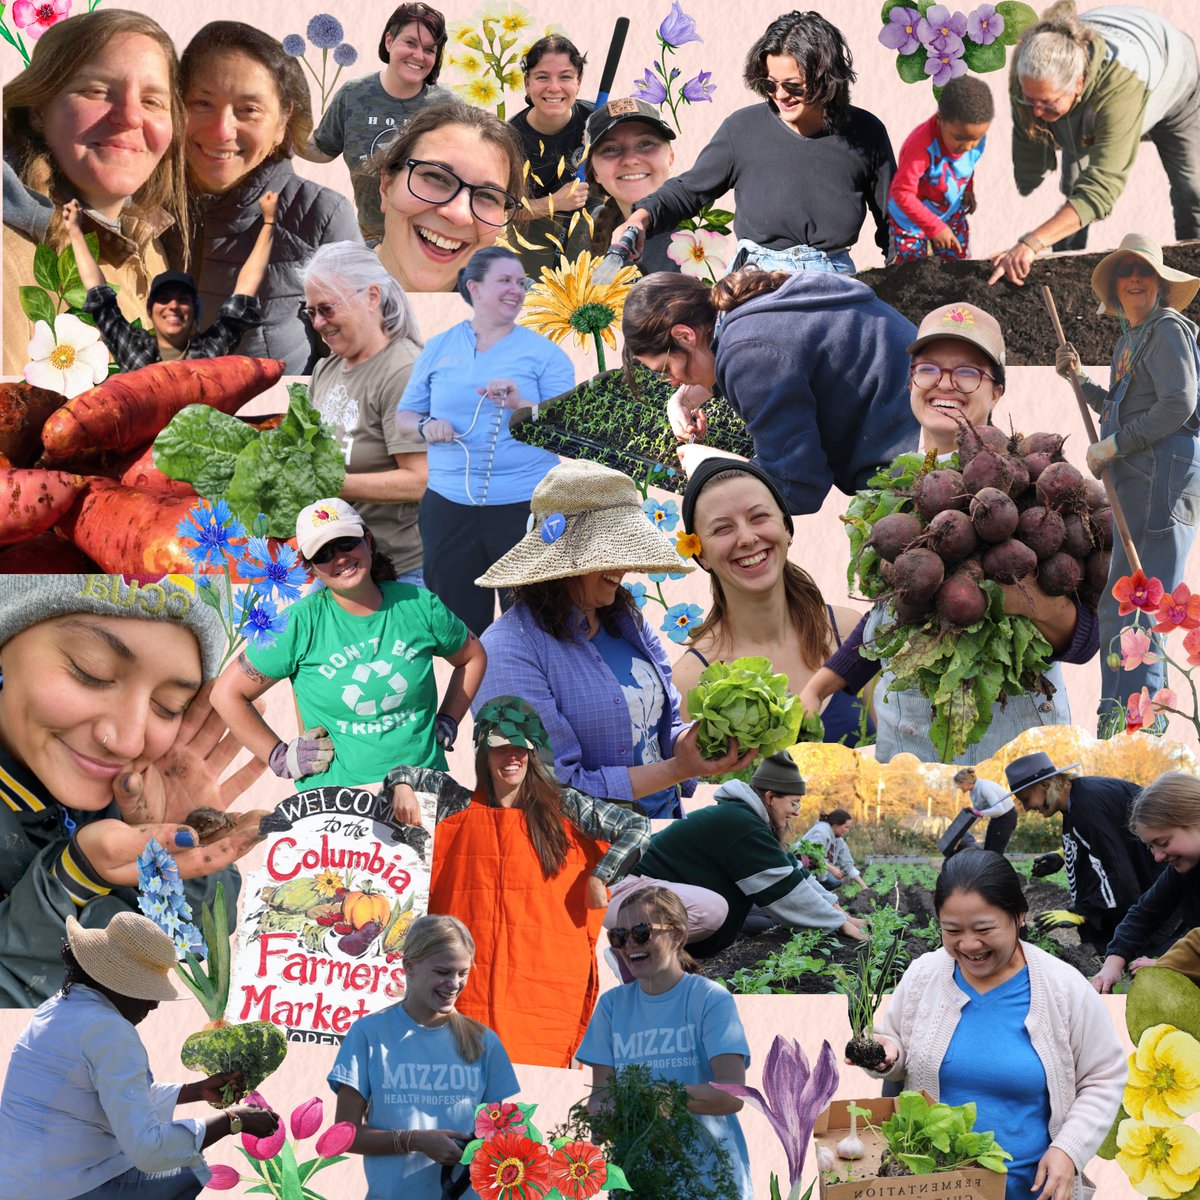 Happy International Women's Day! We want to spotlight the incredible women who helped CCUA grow to where it is today. From staff, to volunteers, to participants, to partners, we are so grateful for the dedicated women who share our goal of feeding and educating our community💚